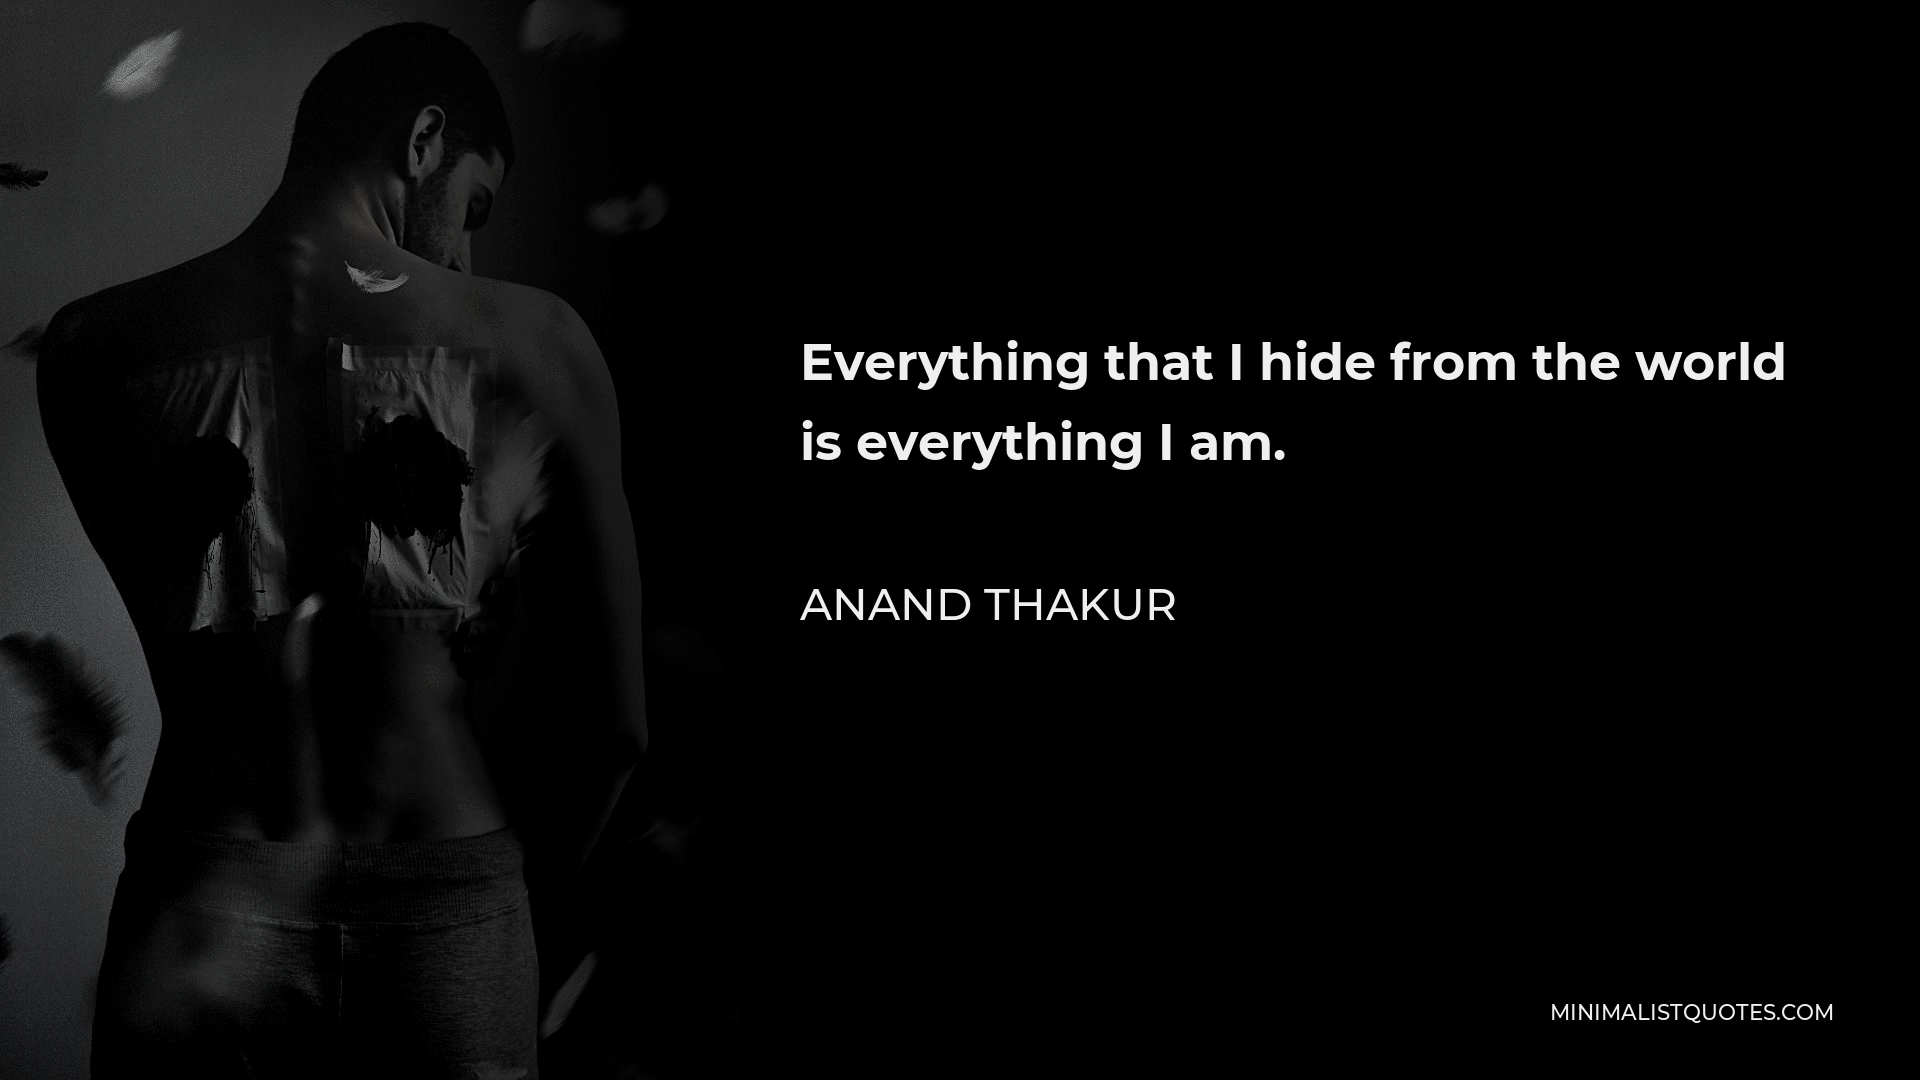 Anand Thakur Quote - Everything that I hide from the world is everything I am.